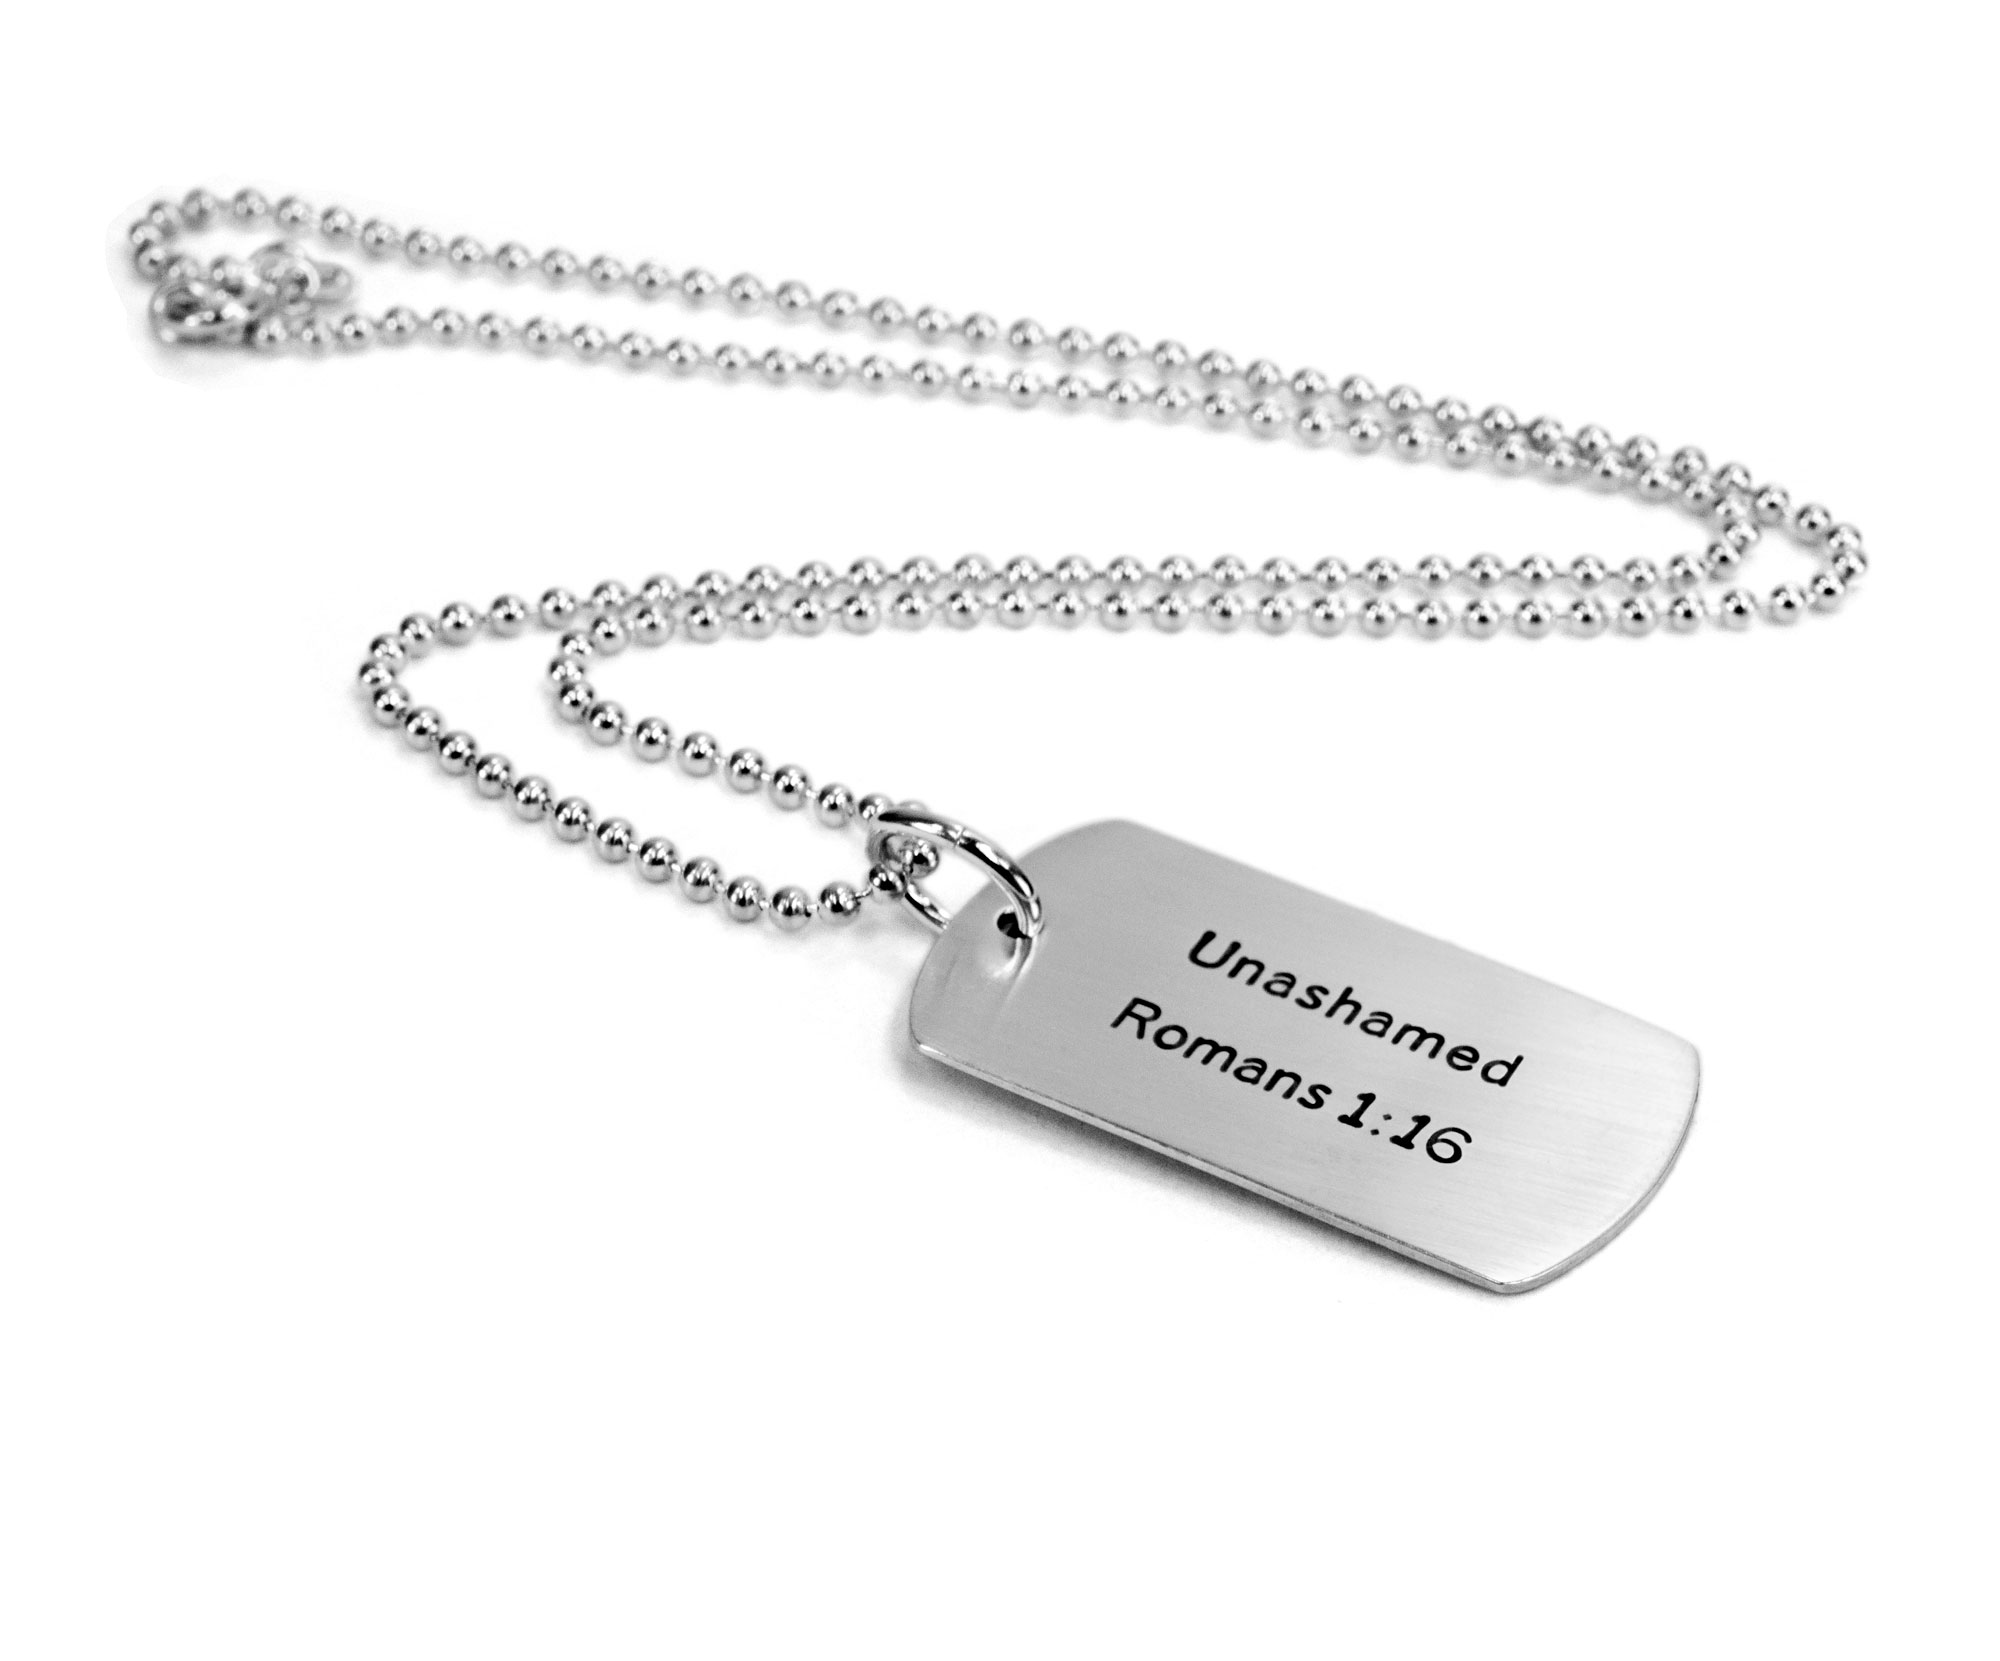 Podzly 24 Piece Military Dog Tags - Silver Metal Necklaces with 2 Tag with  24 Chain - Breakaway Features - Perfect for Army-Themed Birthday Parties